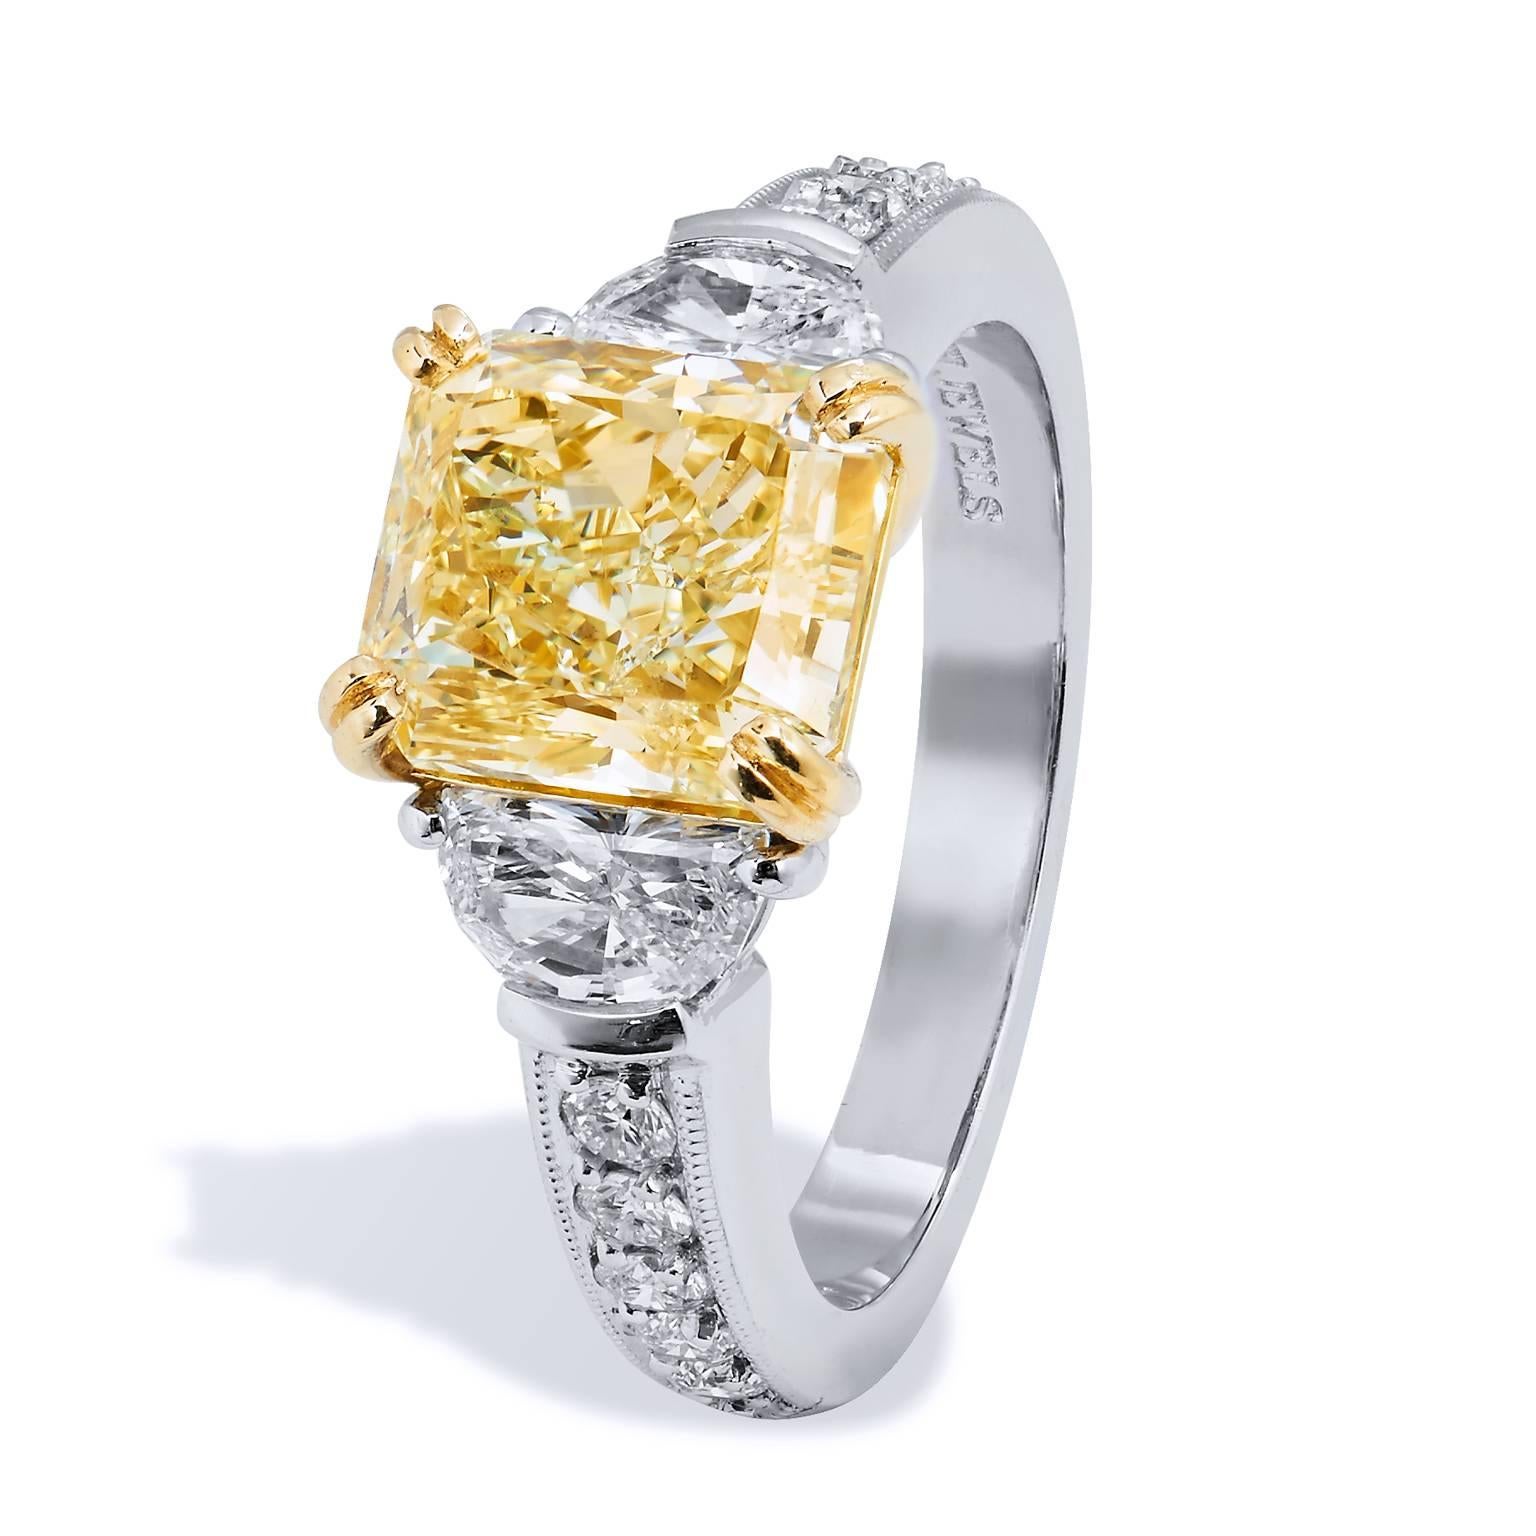 GIA Certified 3.17 Carat Fancy Yellow and Half Moon-Shaped Diamond Engagement Ring

Handmade by H&H Jewels this ring is a luminous, awe-inspiring 3.17 carat fancy yellow diamond set at center ( SI1/EX/VG; GIA #517599400), radiates a warmth and